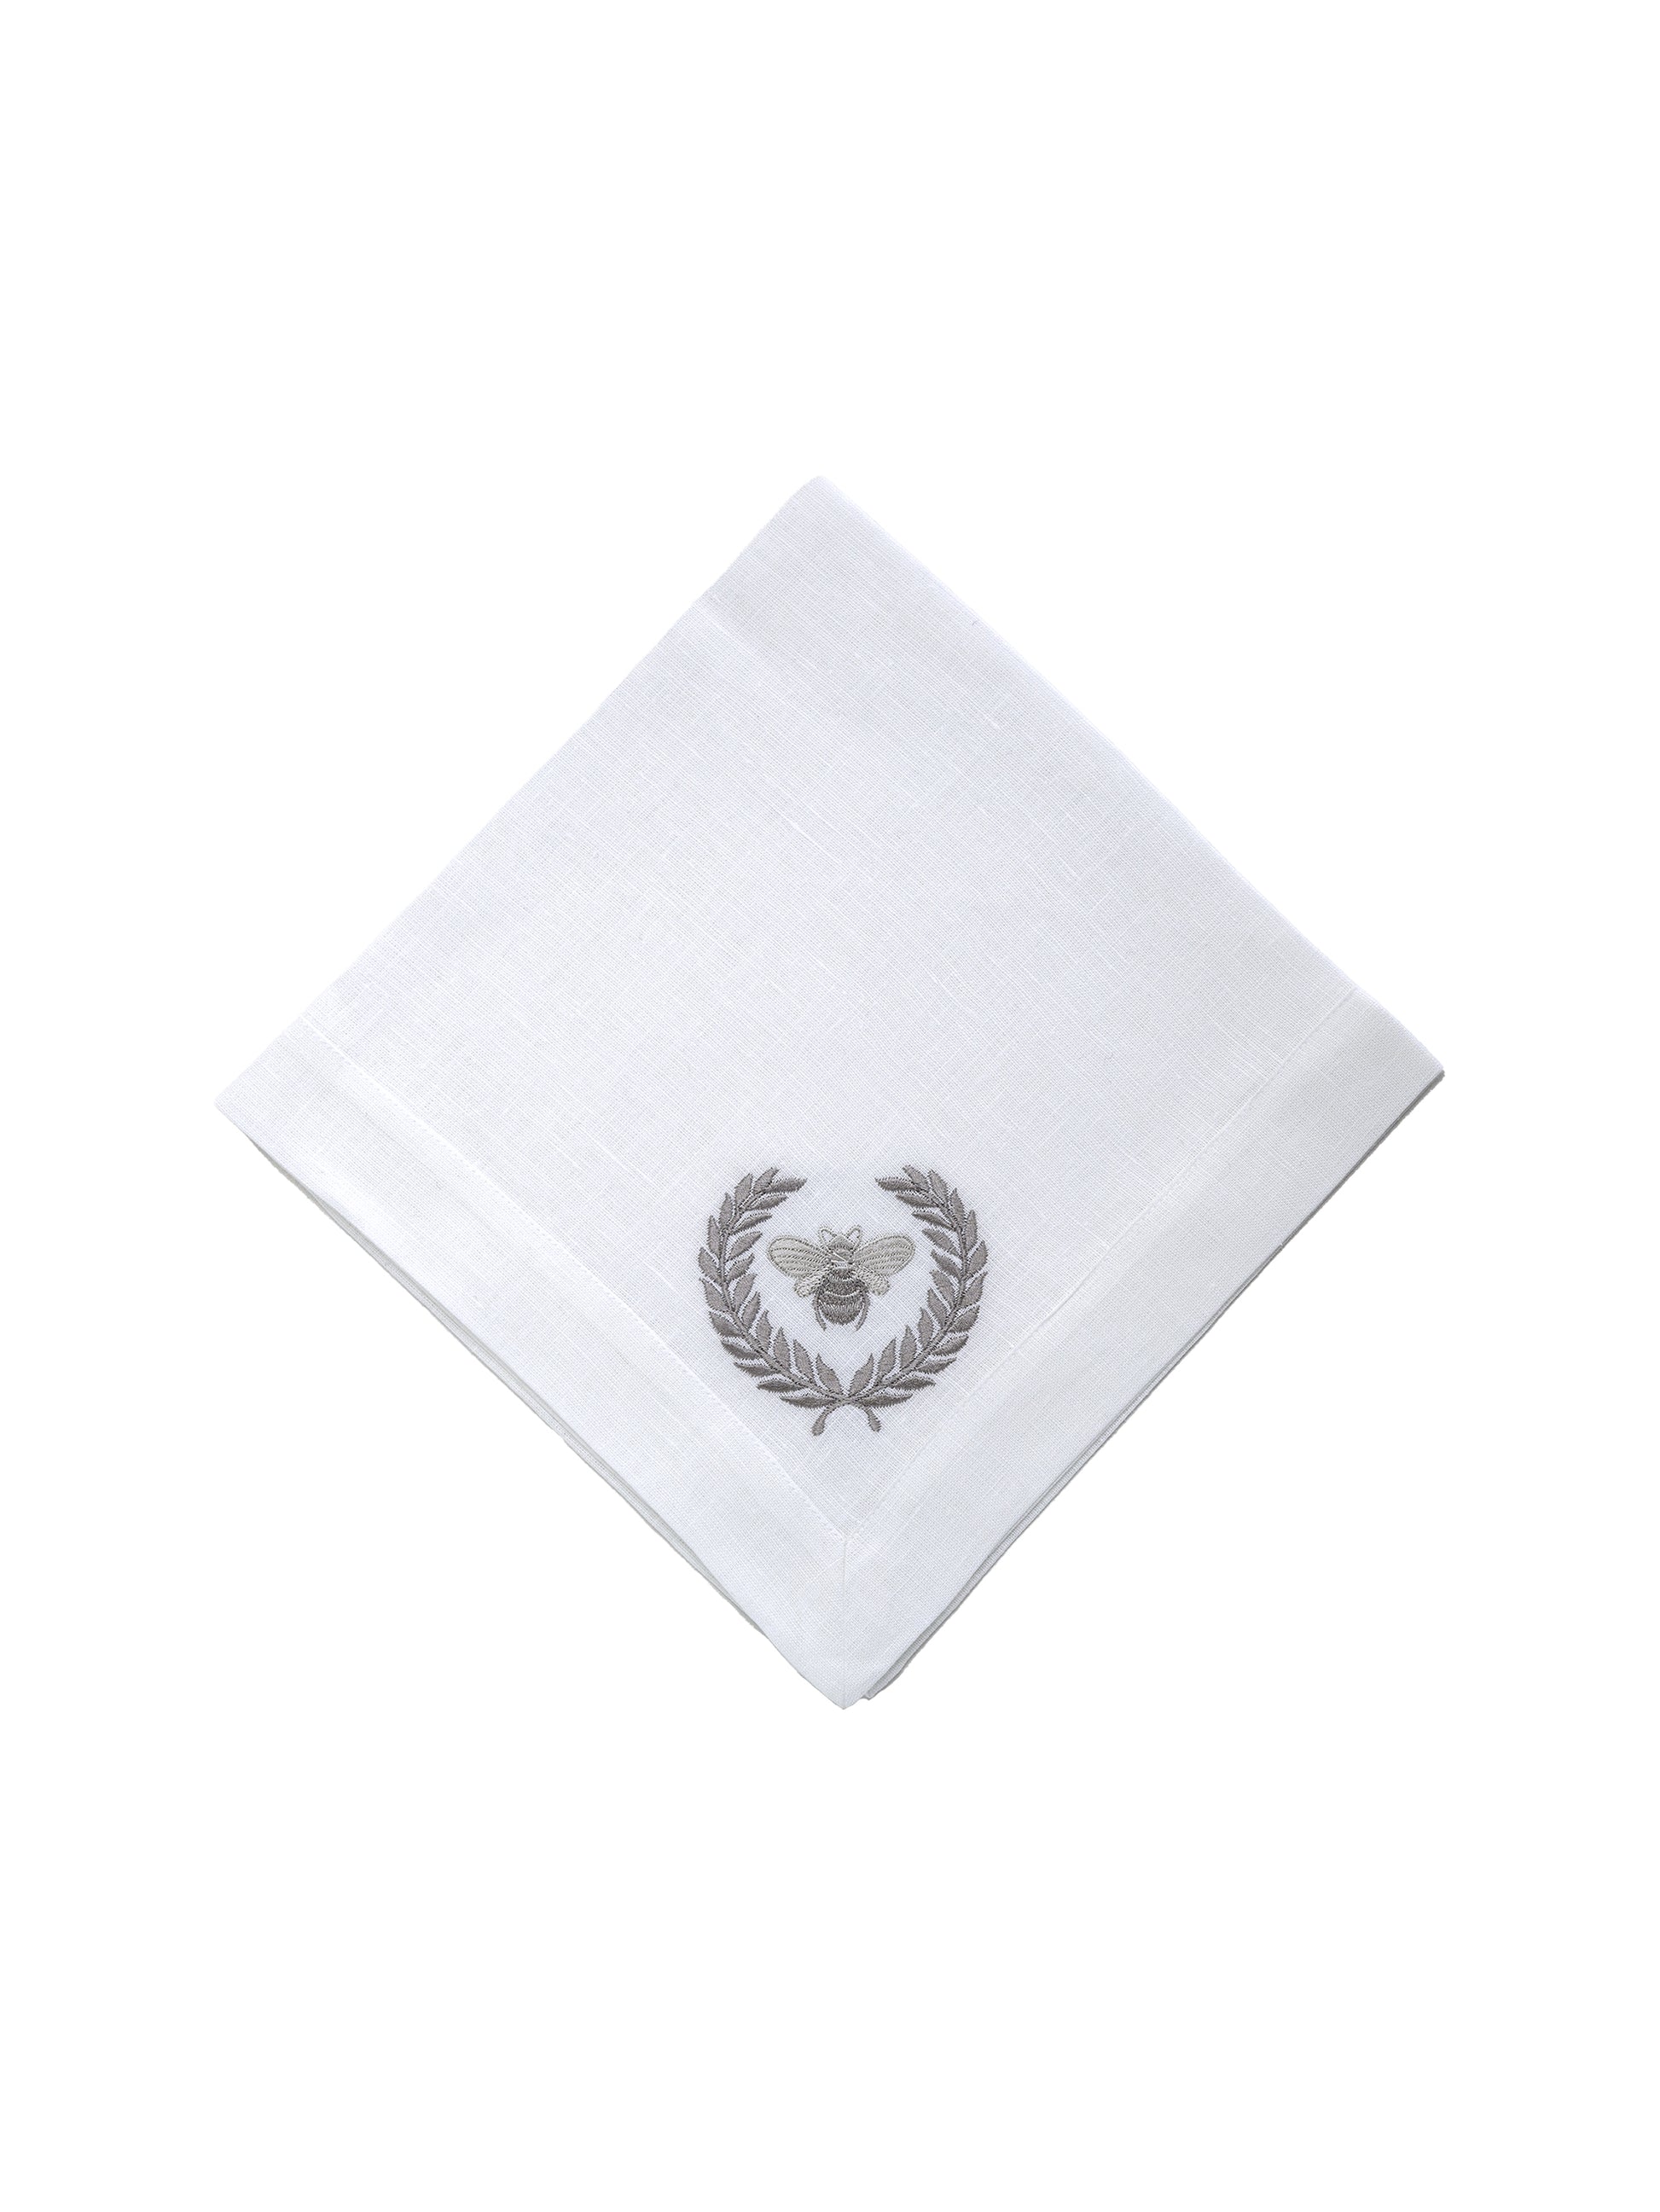 Embroidered Bee Linen Dinner Napkins Weston Table